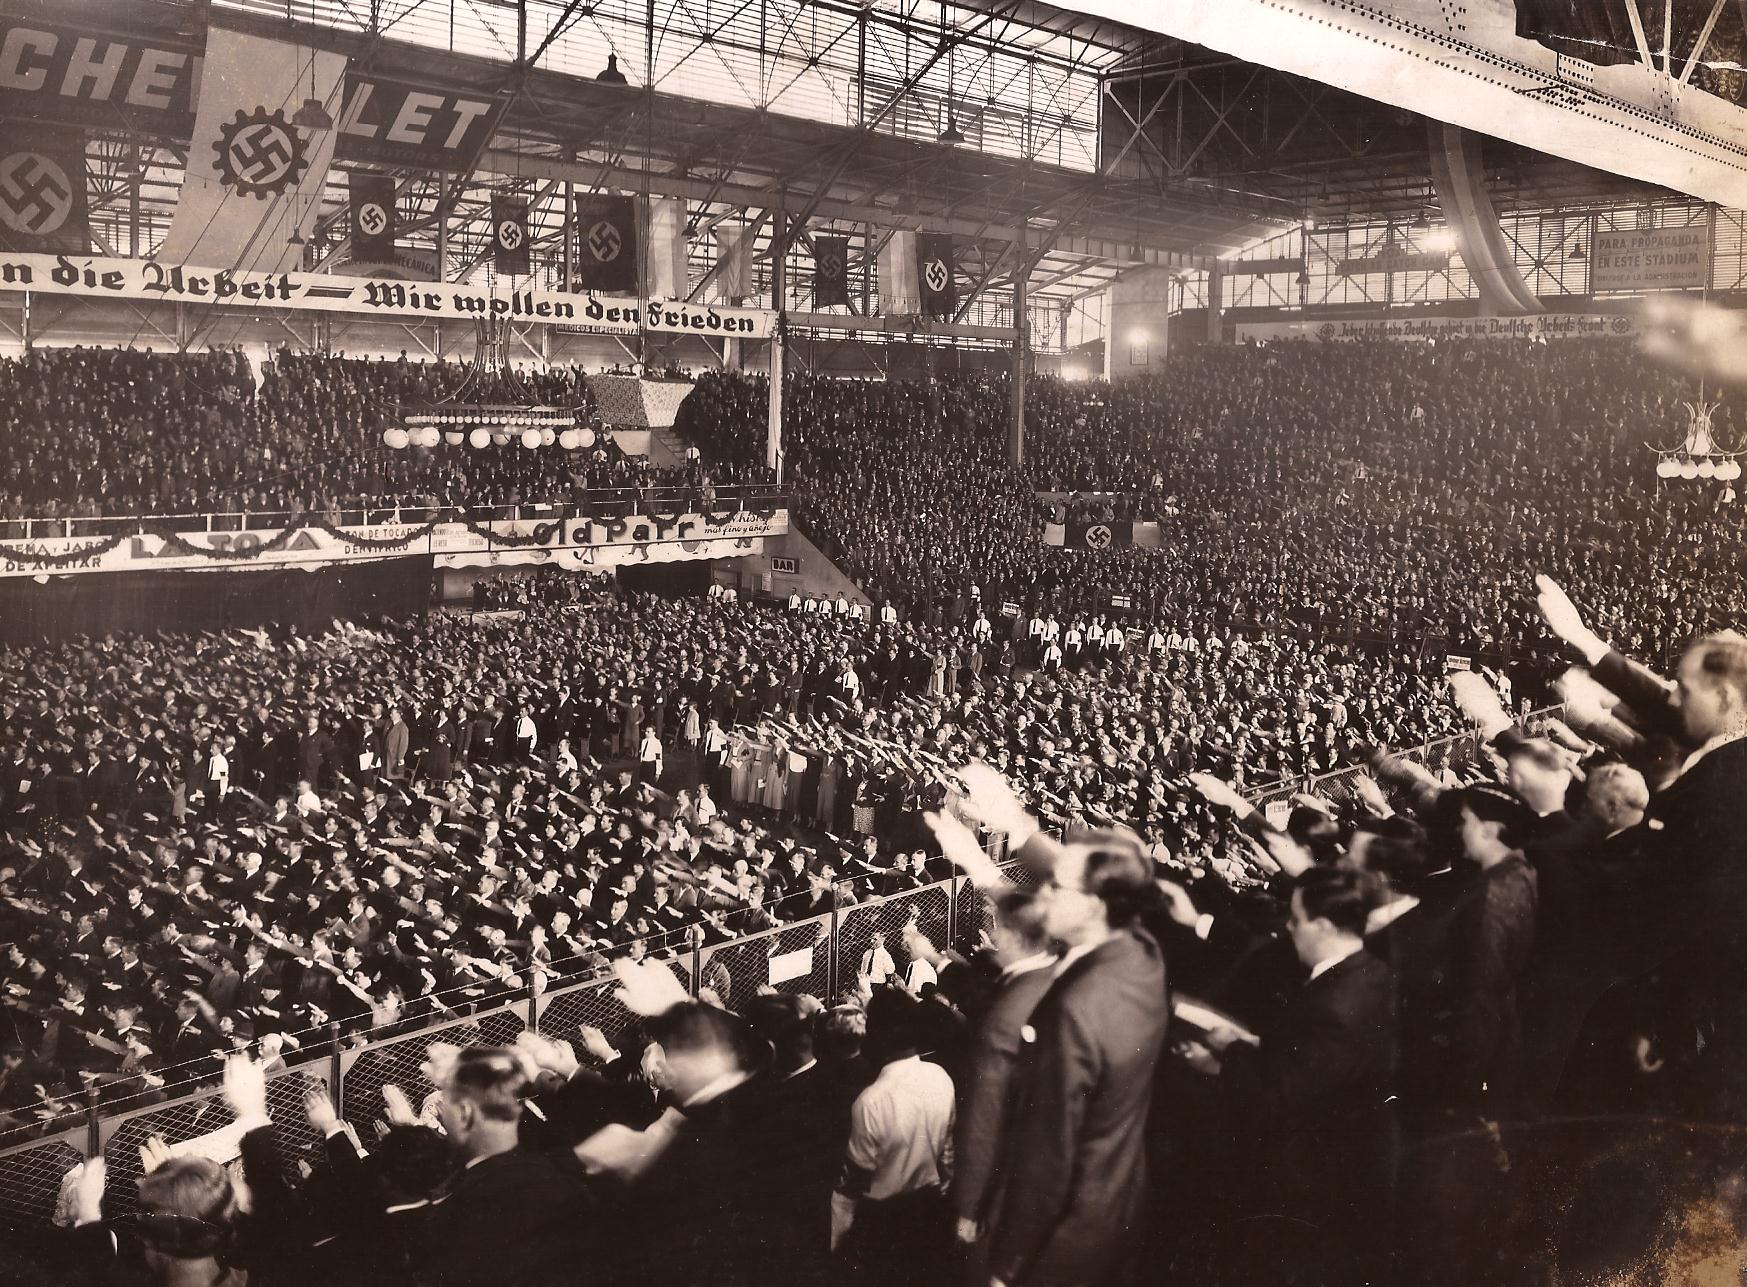 A stadium hosts 20,000 supporters during a Nazi rally in Buenos Aires, Argentina in 1938. Surprisingly, rallies such as this took place in many countries before WWII began, including Argentina, the UK and the US.